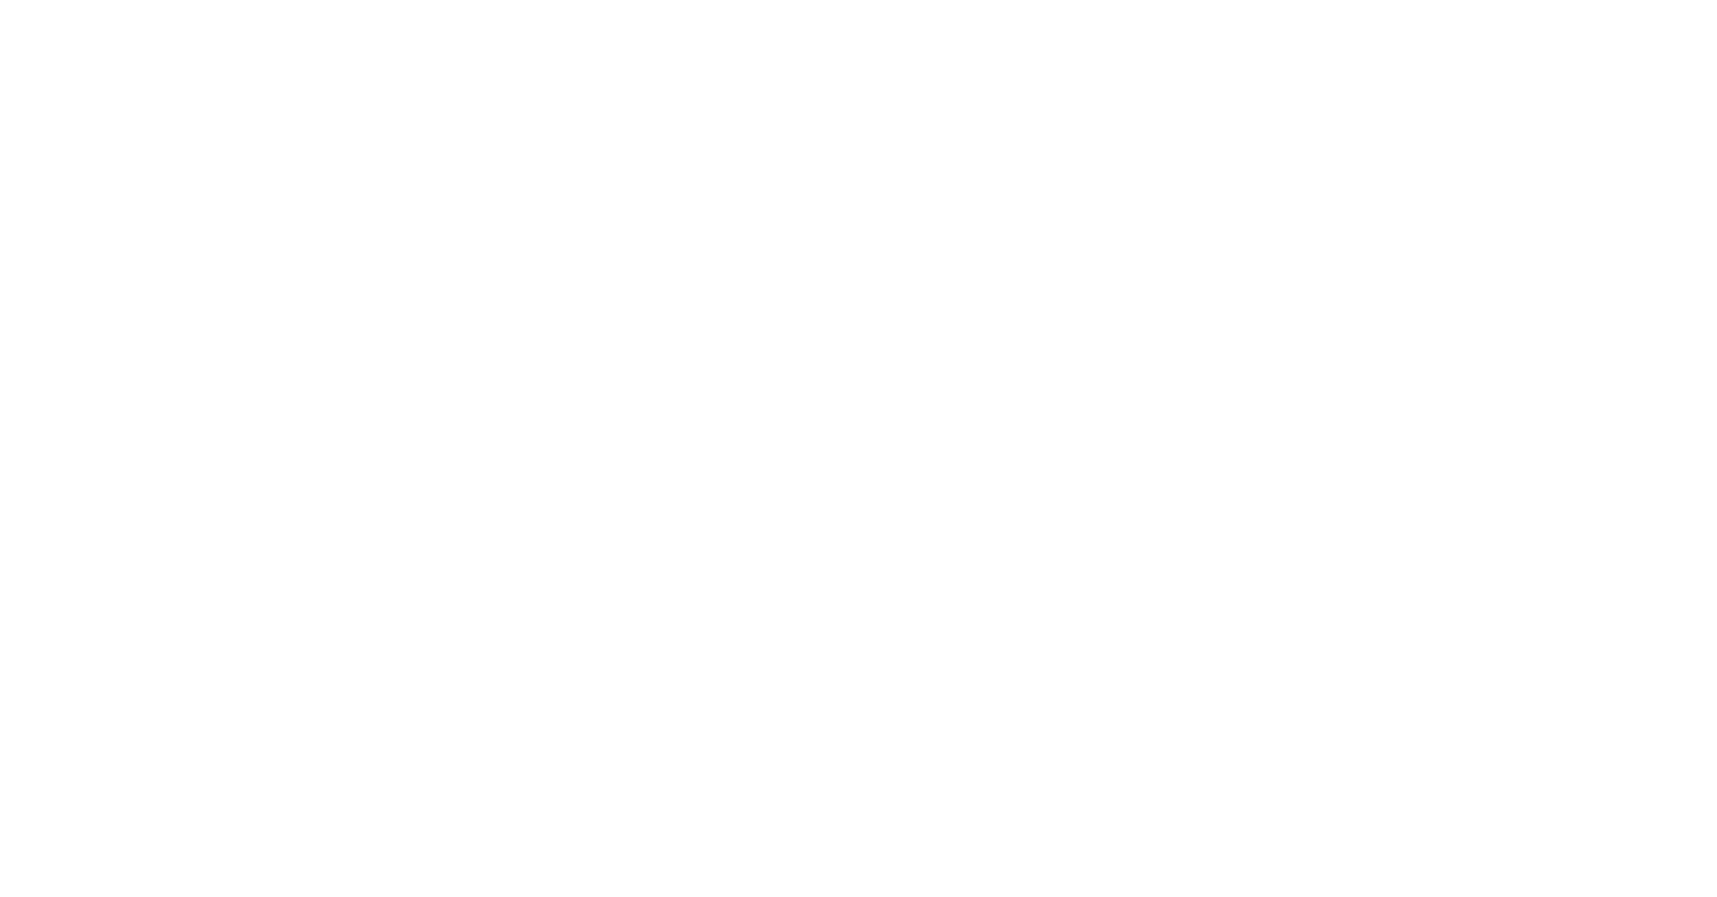 Home Staging Solutions